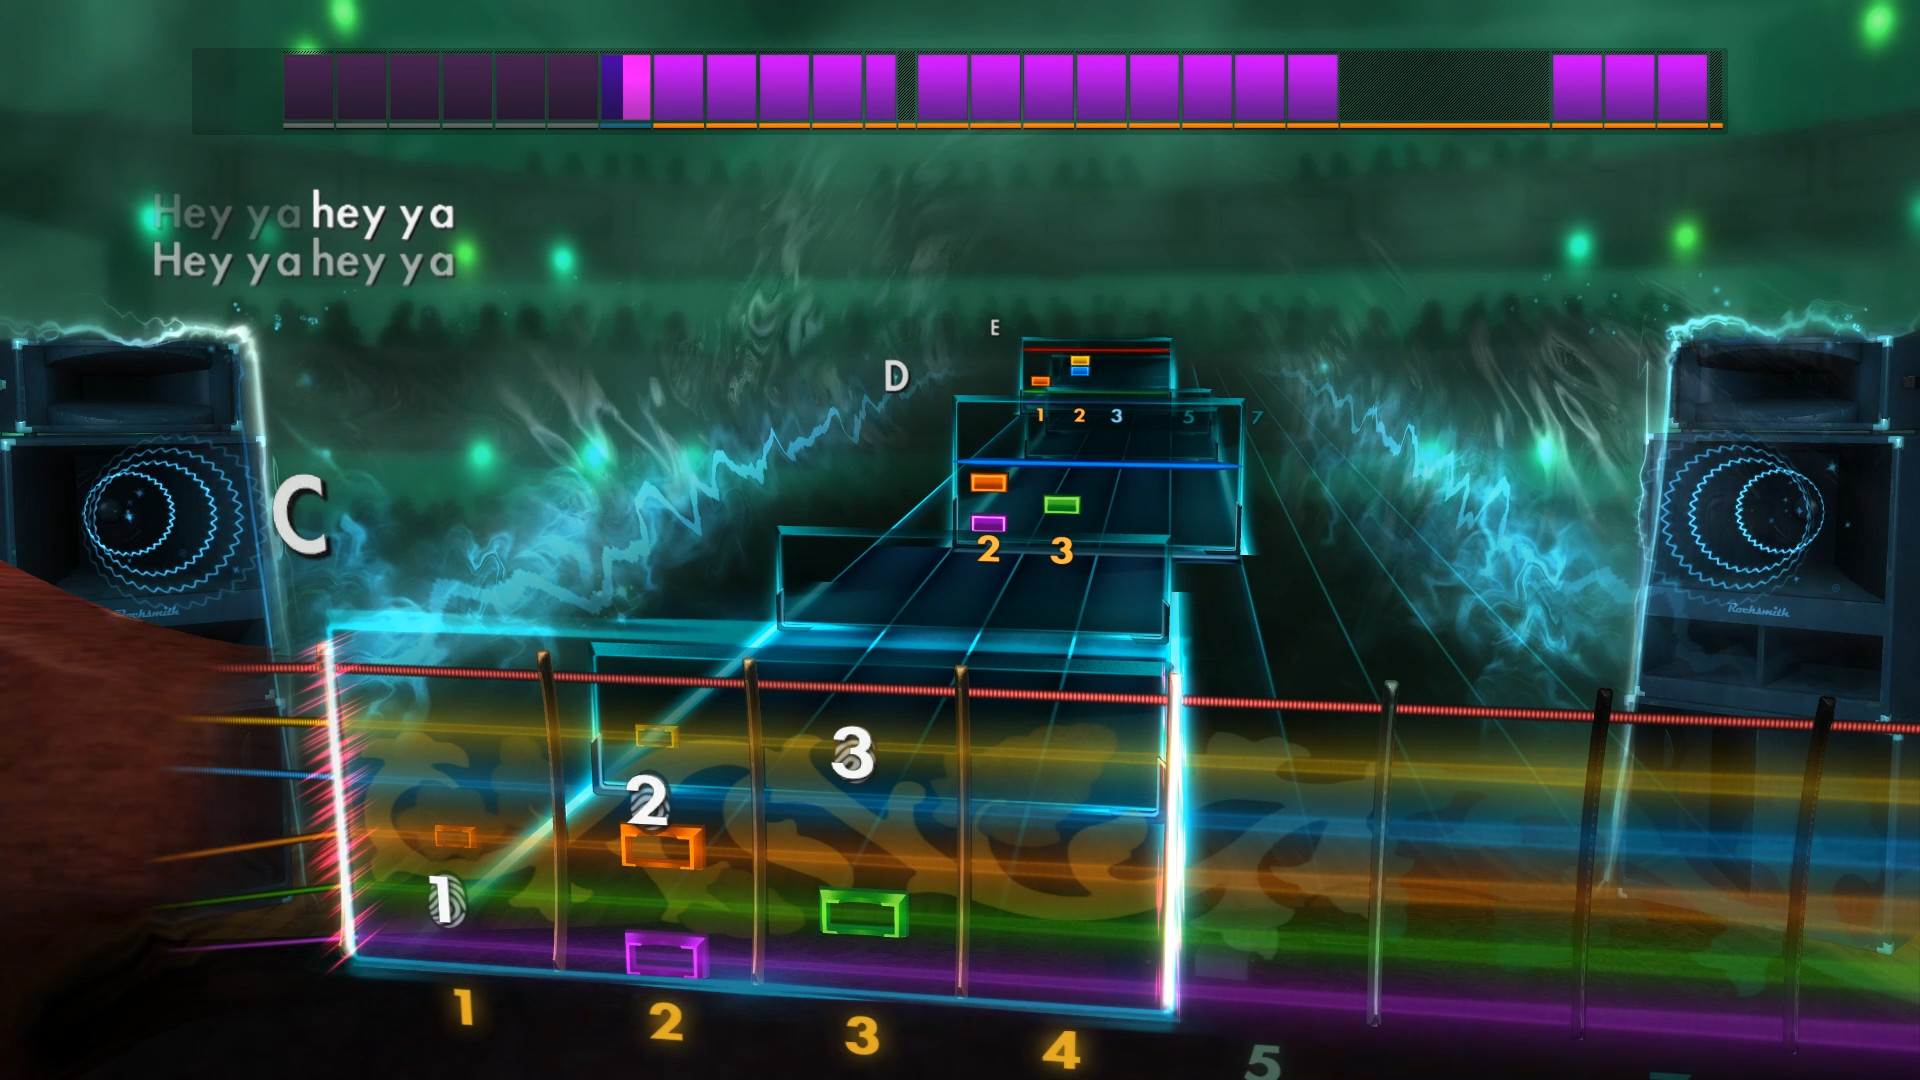 rocksmith 2014 pc nocable patch